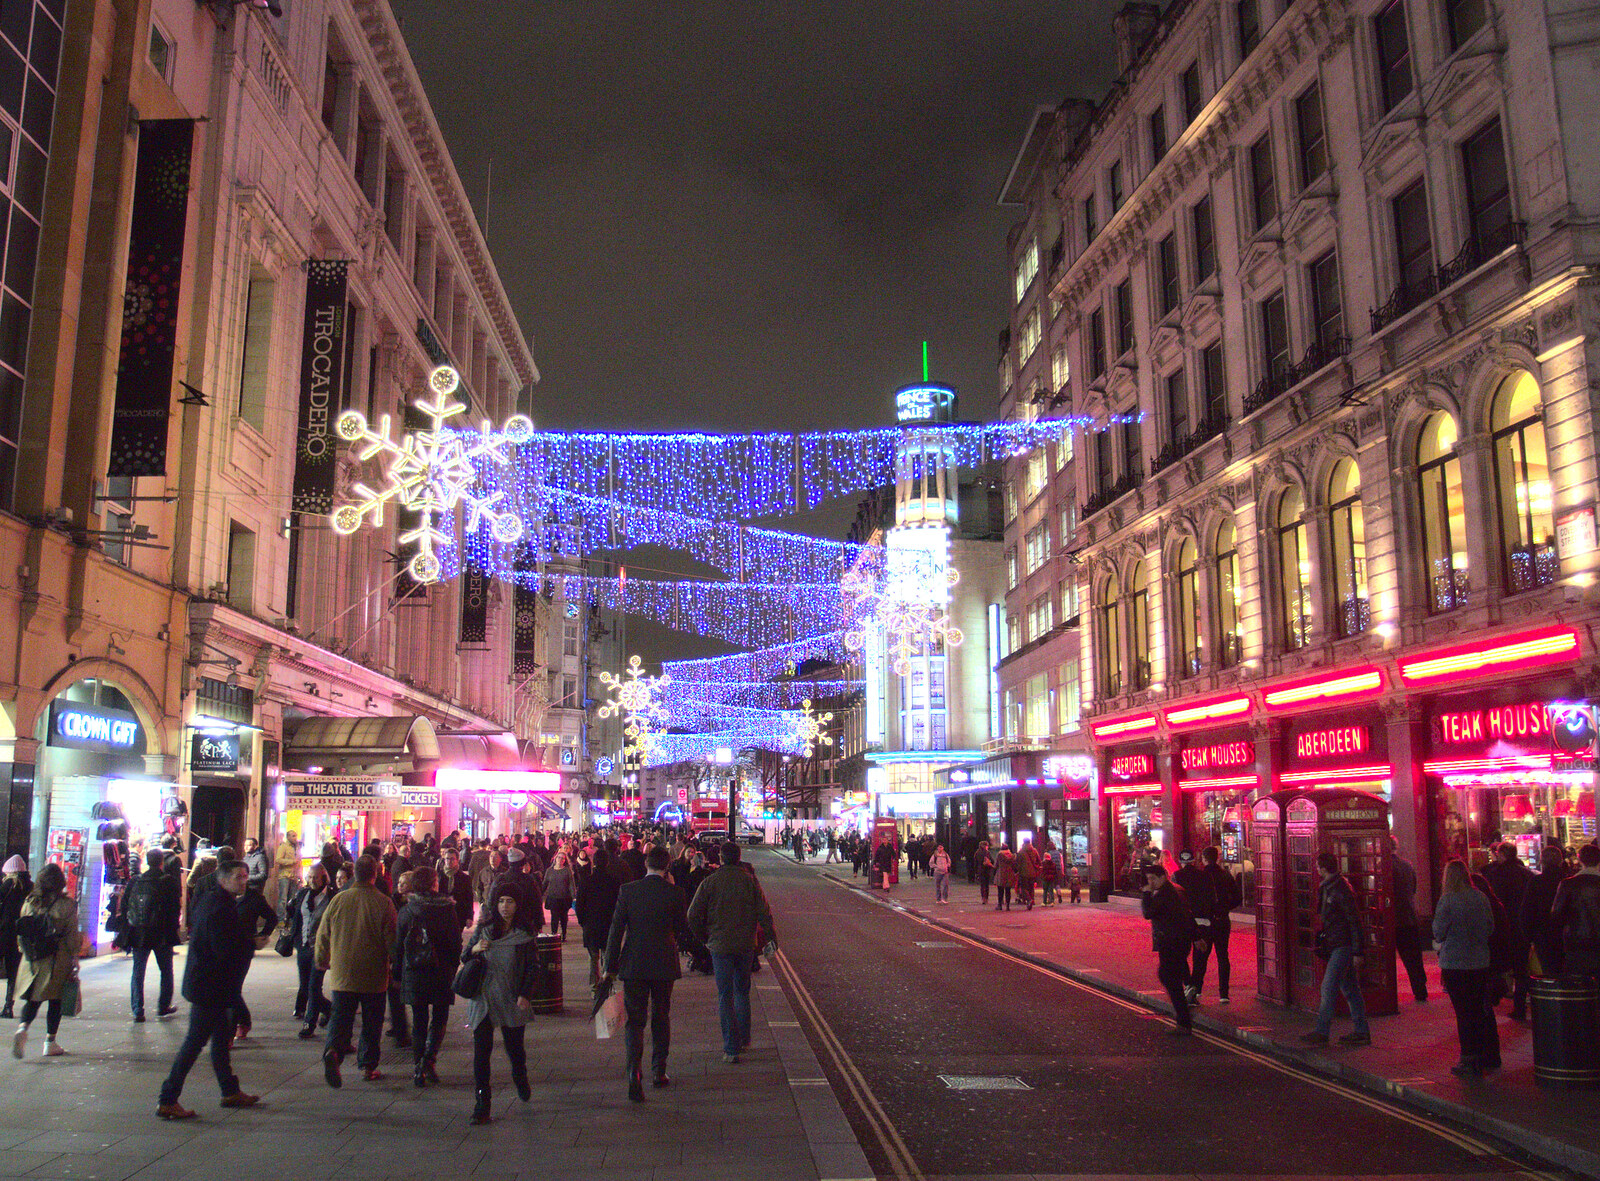 Christmas lights on Coventry Street from SwiftKey Innovation Nights, Westminster, London - 19th December 2014